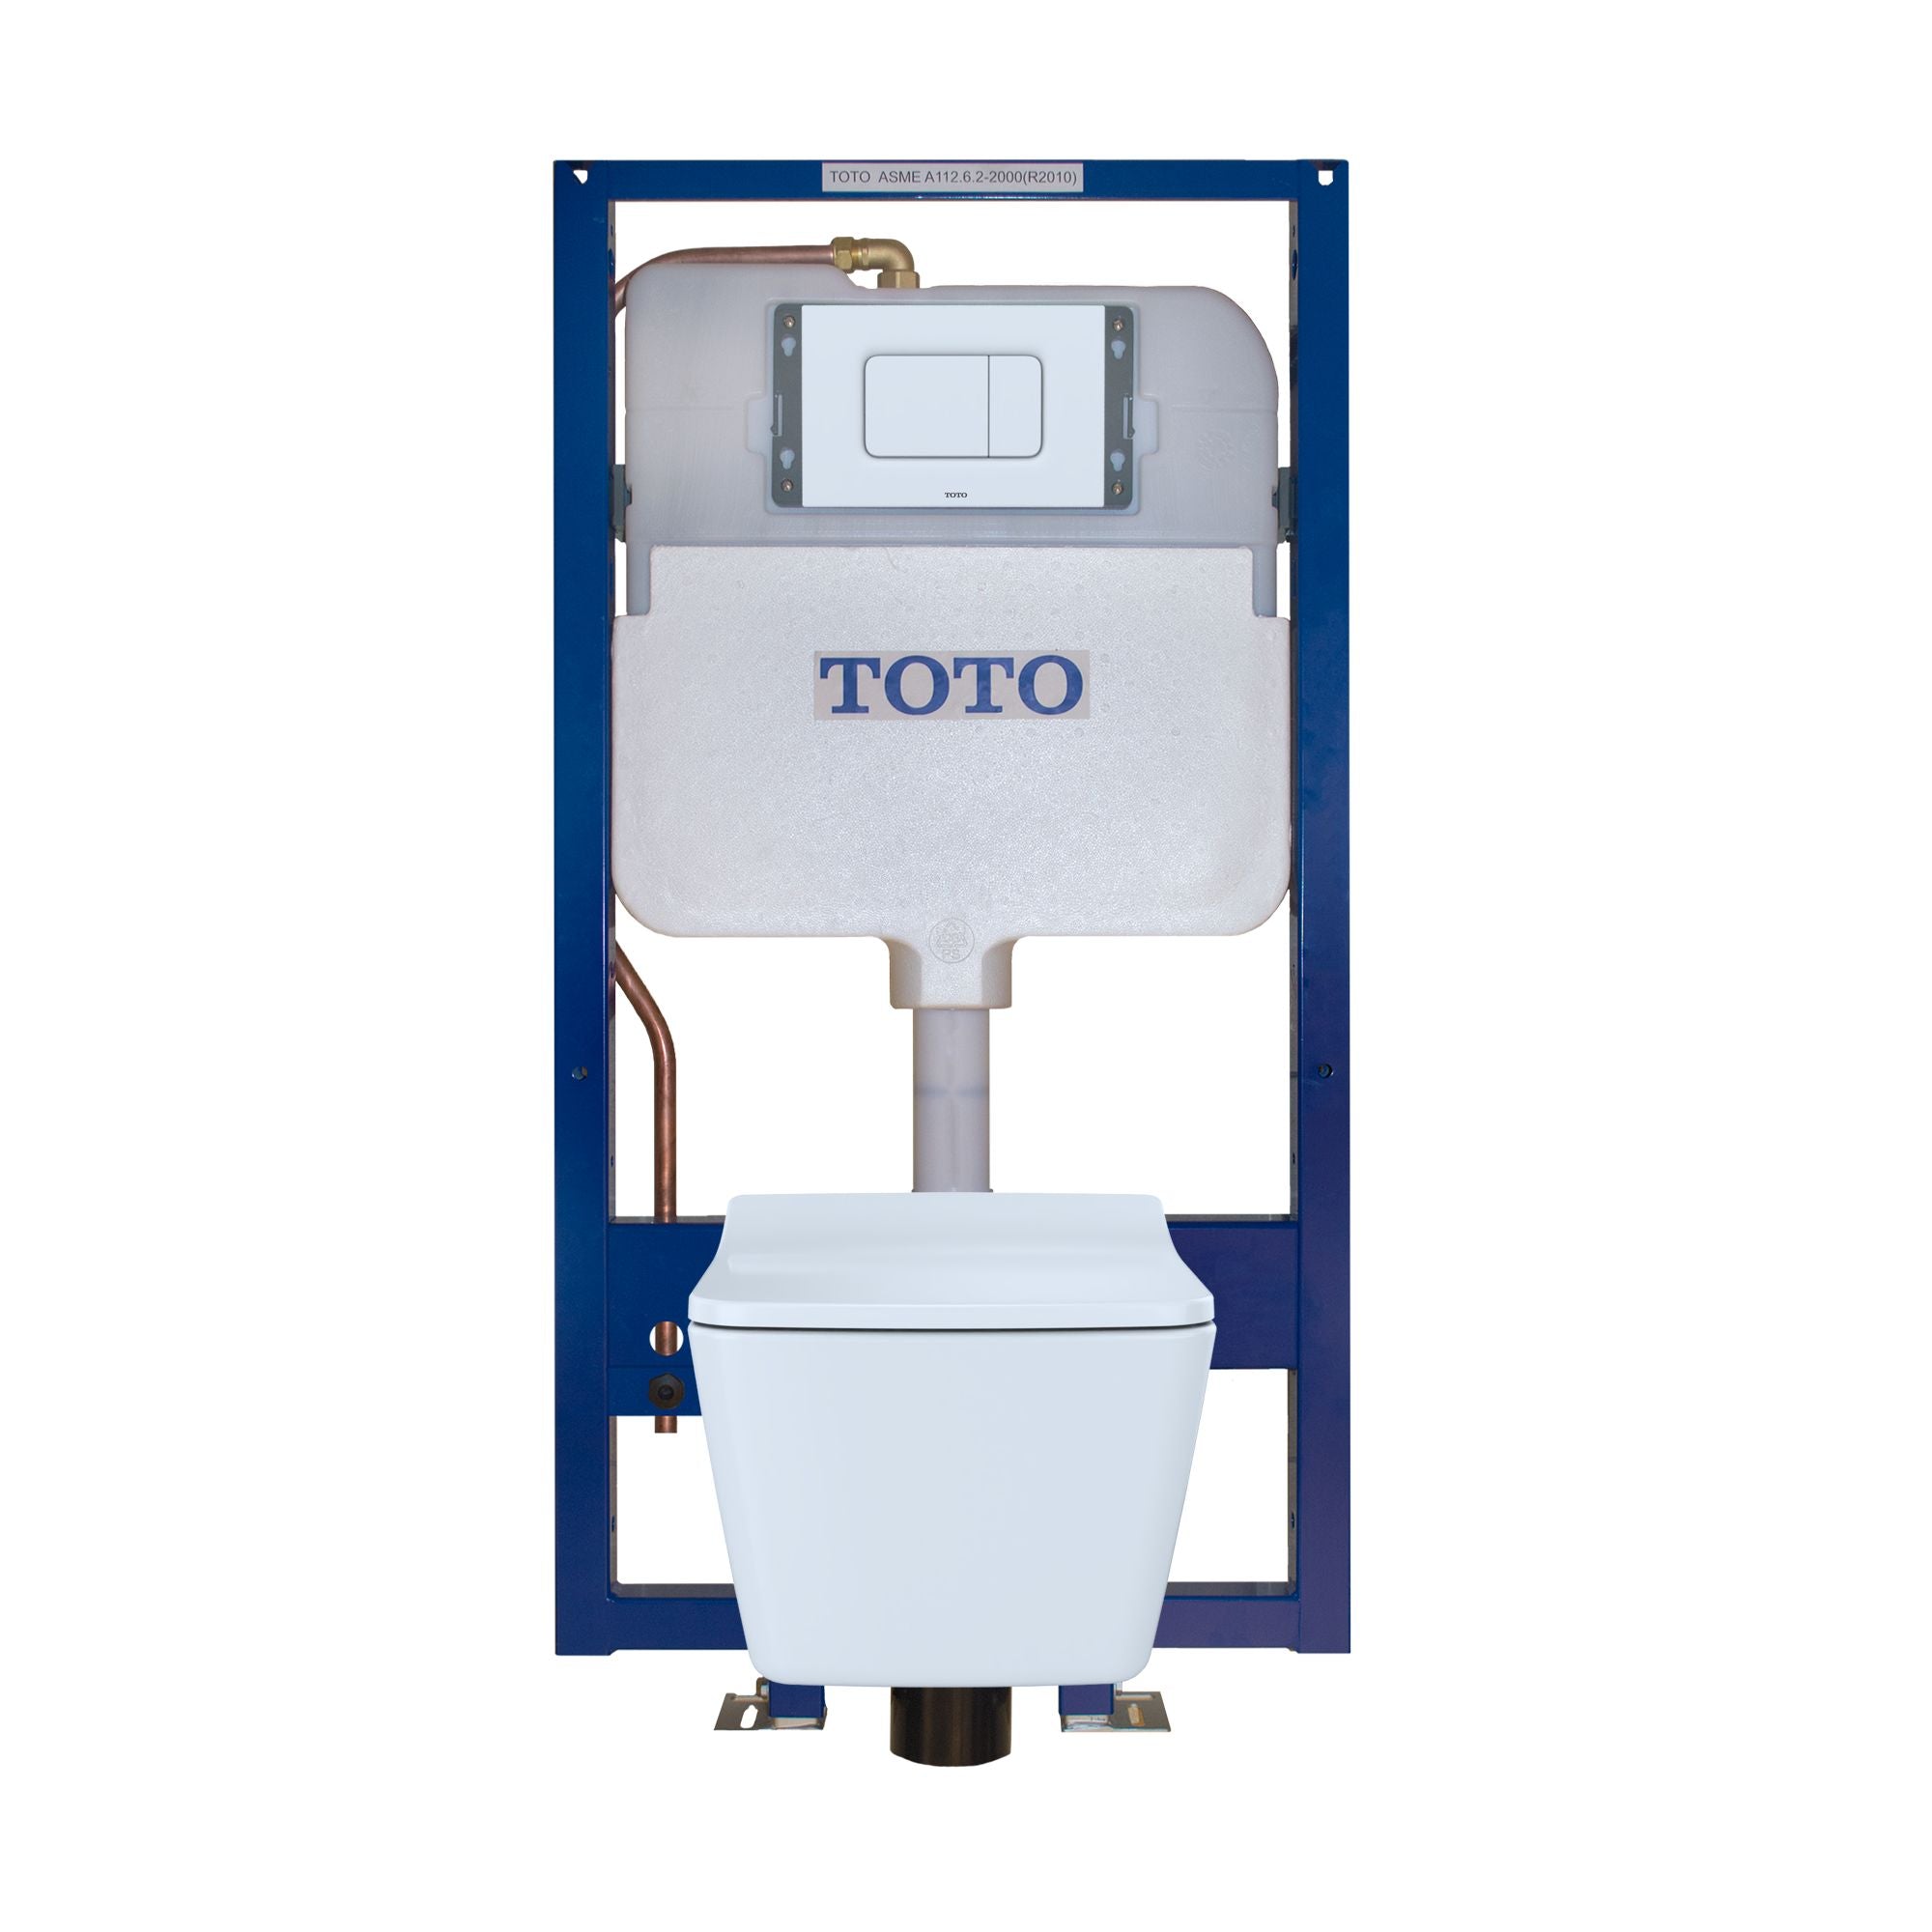 Toto SP Wall-hung Toilet & In-wall Tank System - 1.28/0.9 GPF